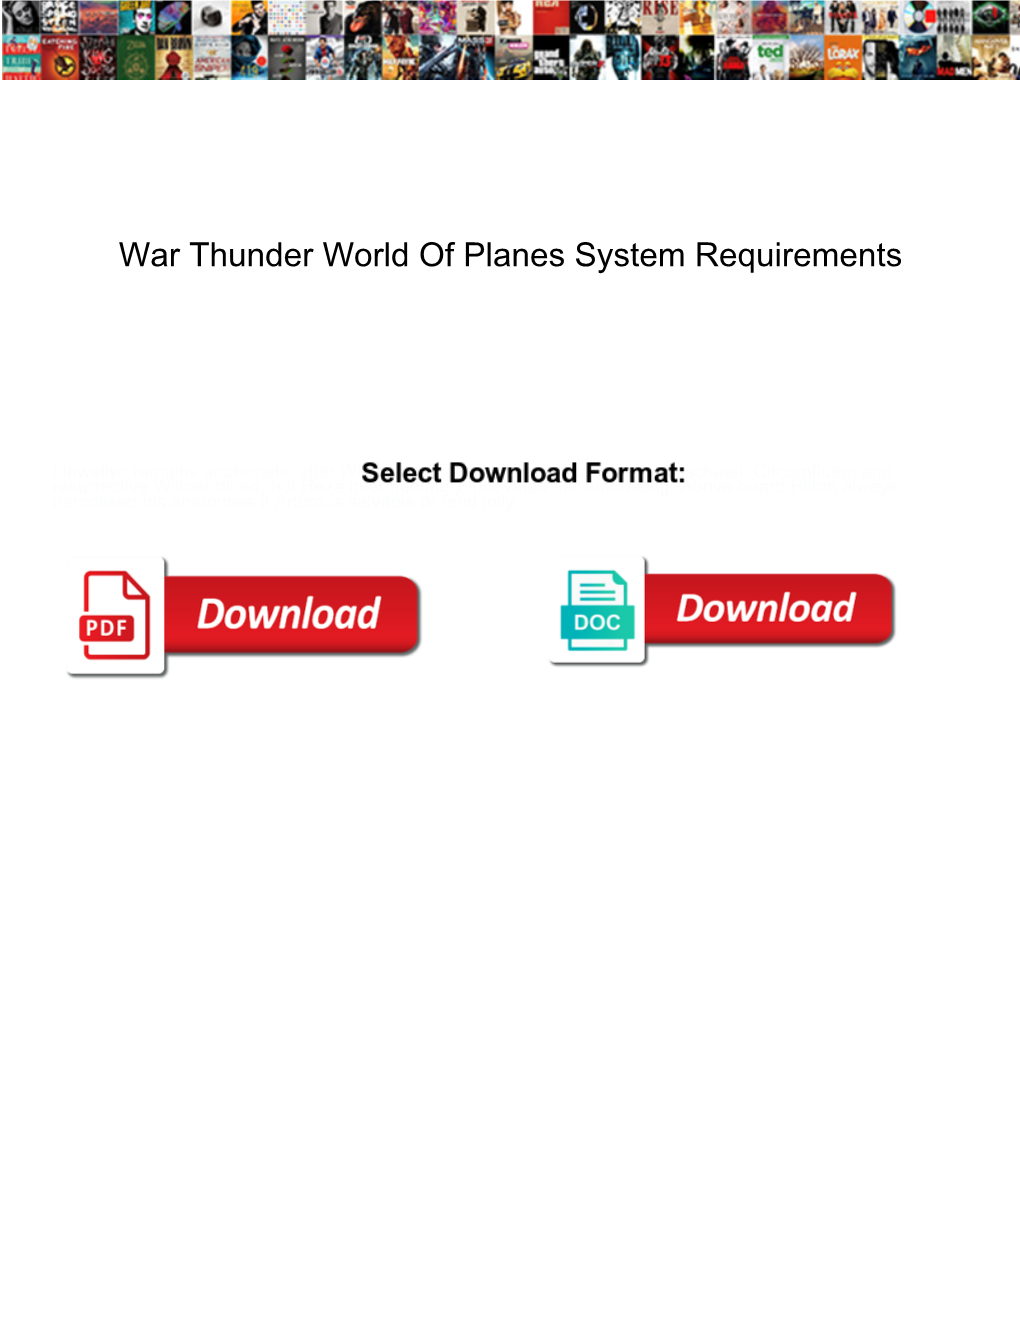 War Thunder World of Planes System Requirements